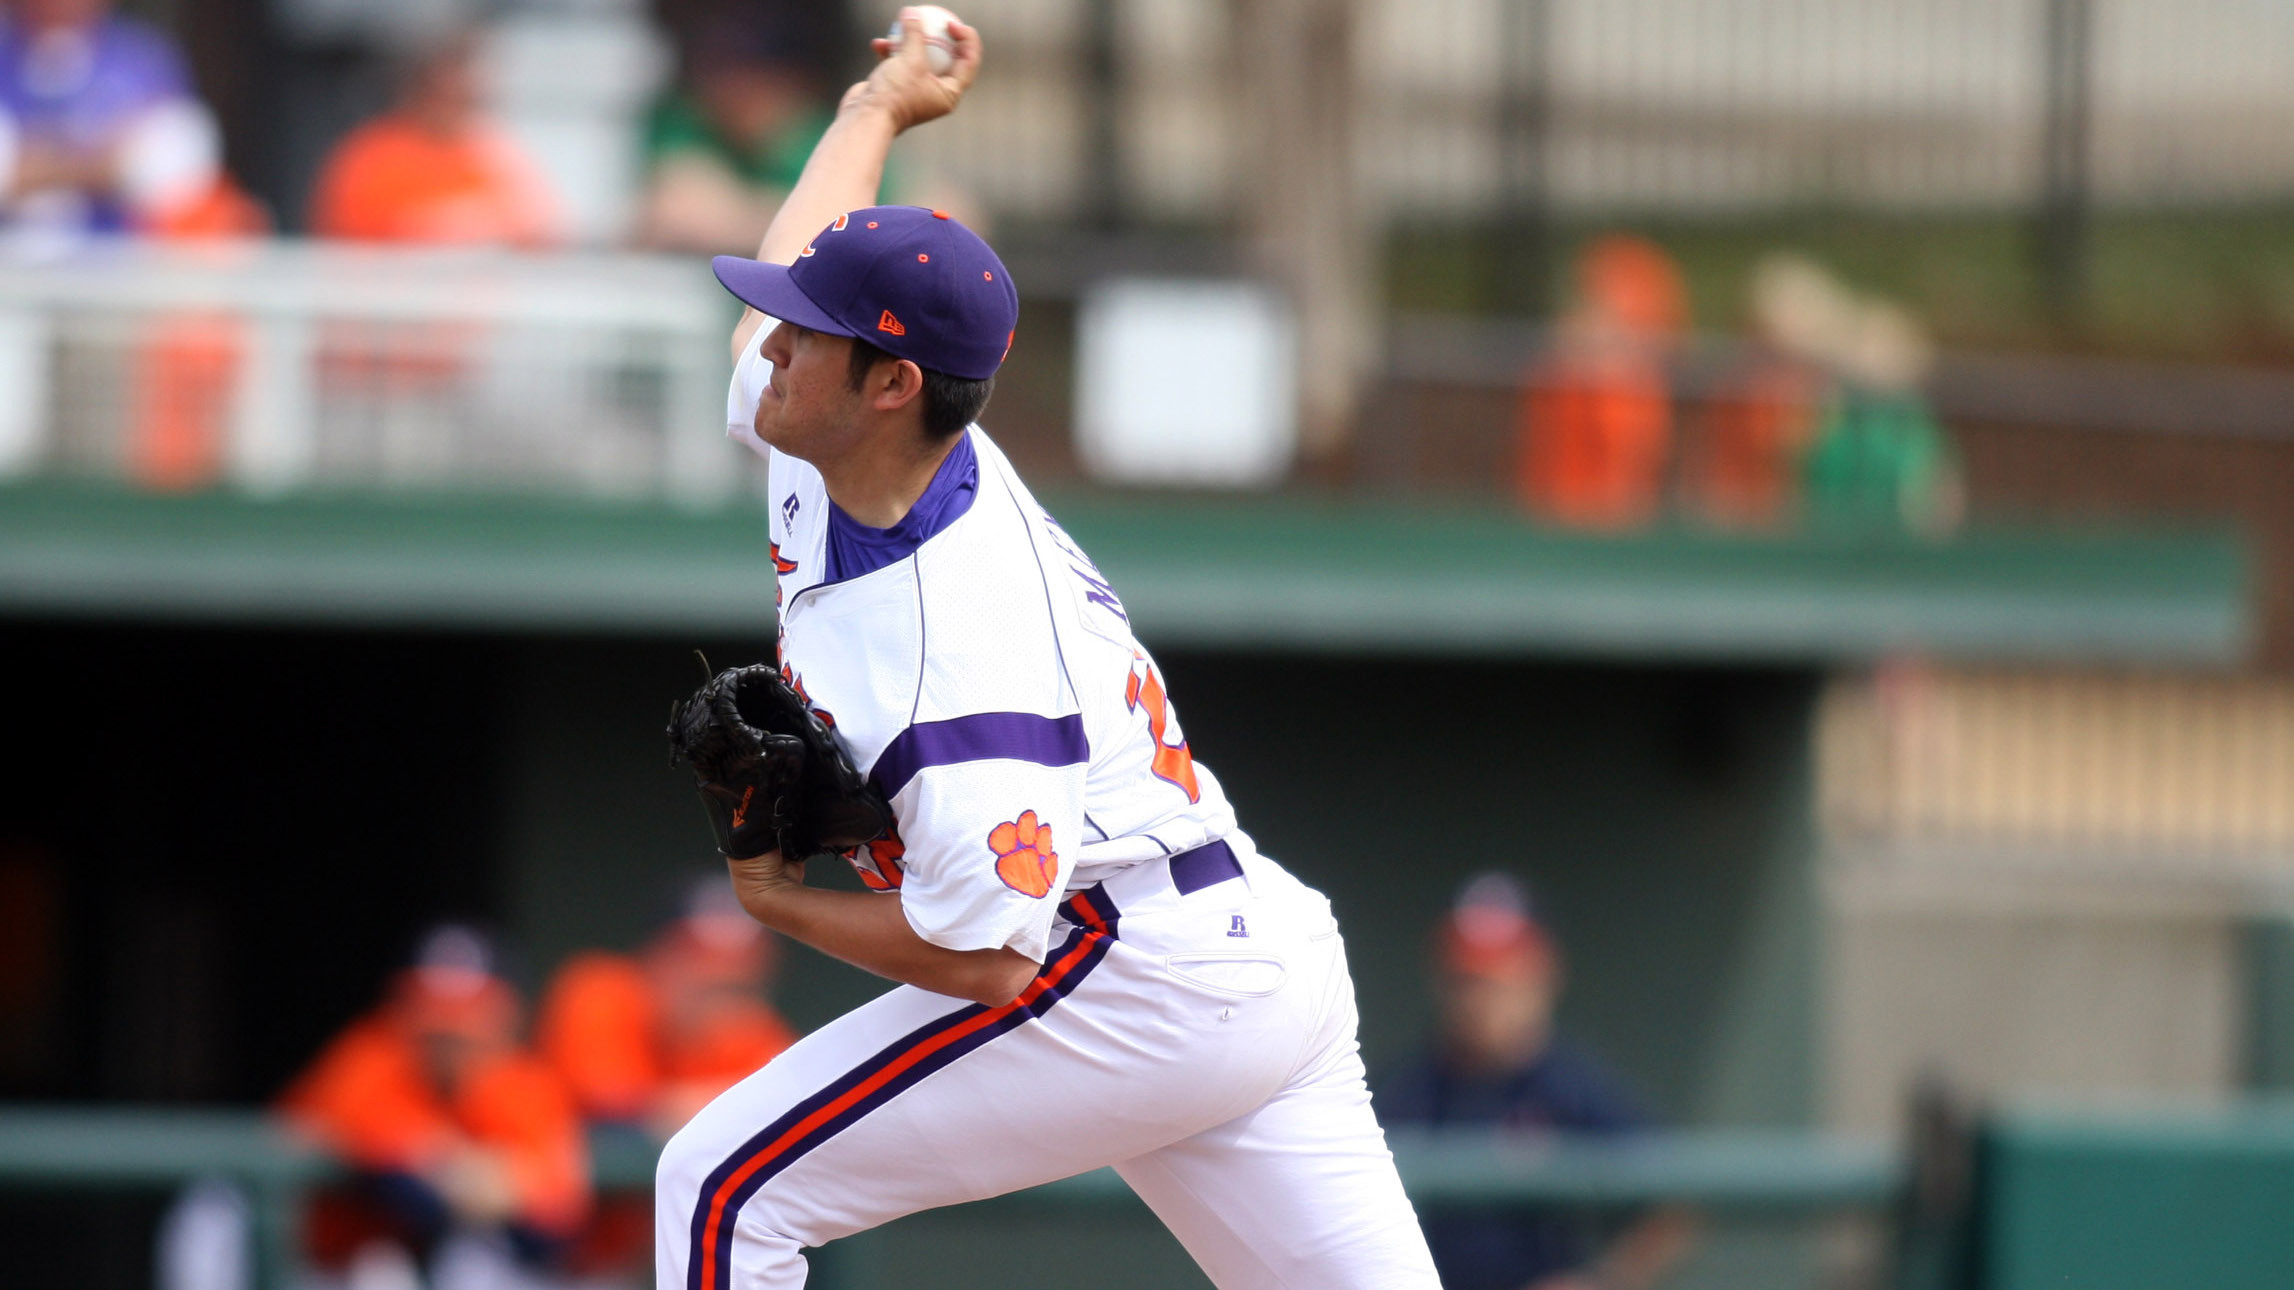 Meyer Pitches Tigers to 4-1 Win Over Gardner-Webb Wednesday